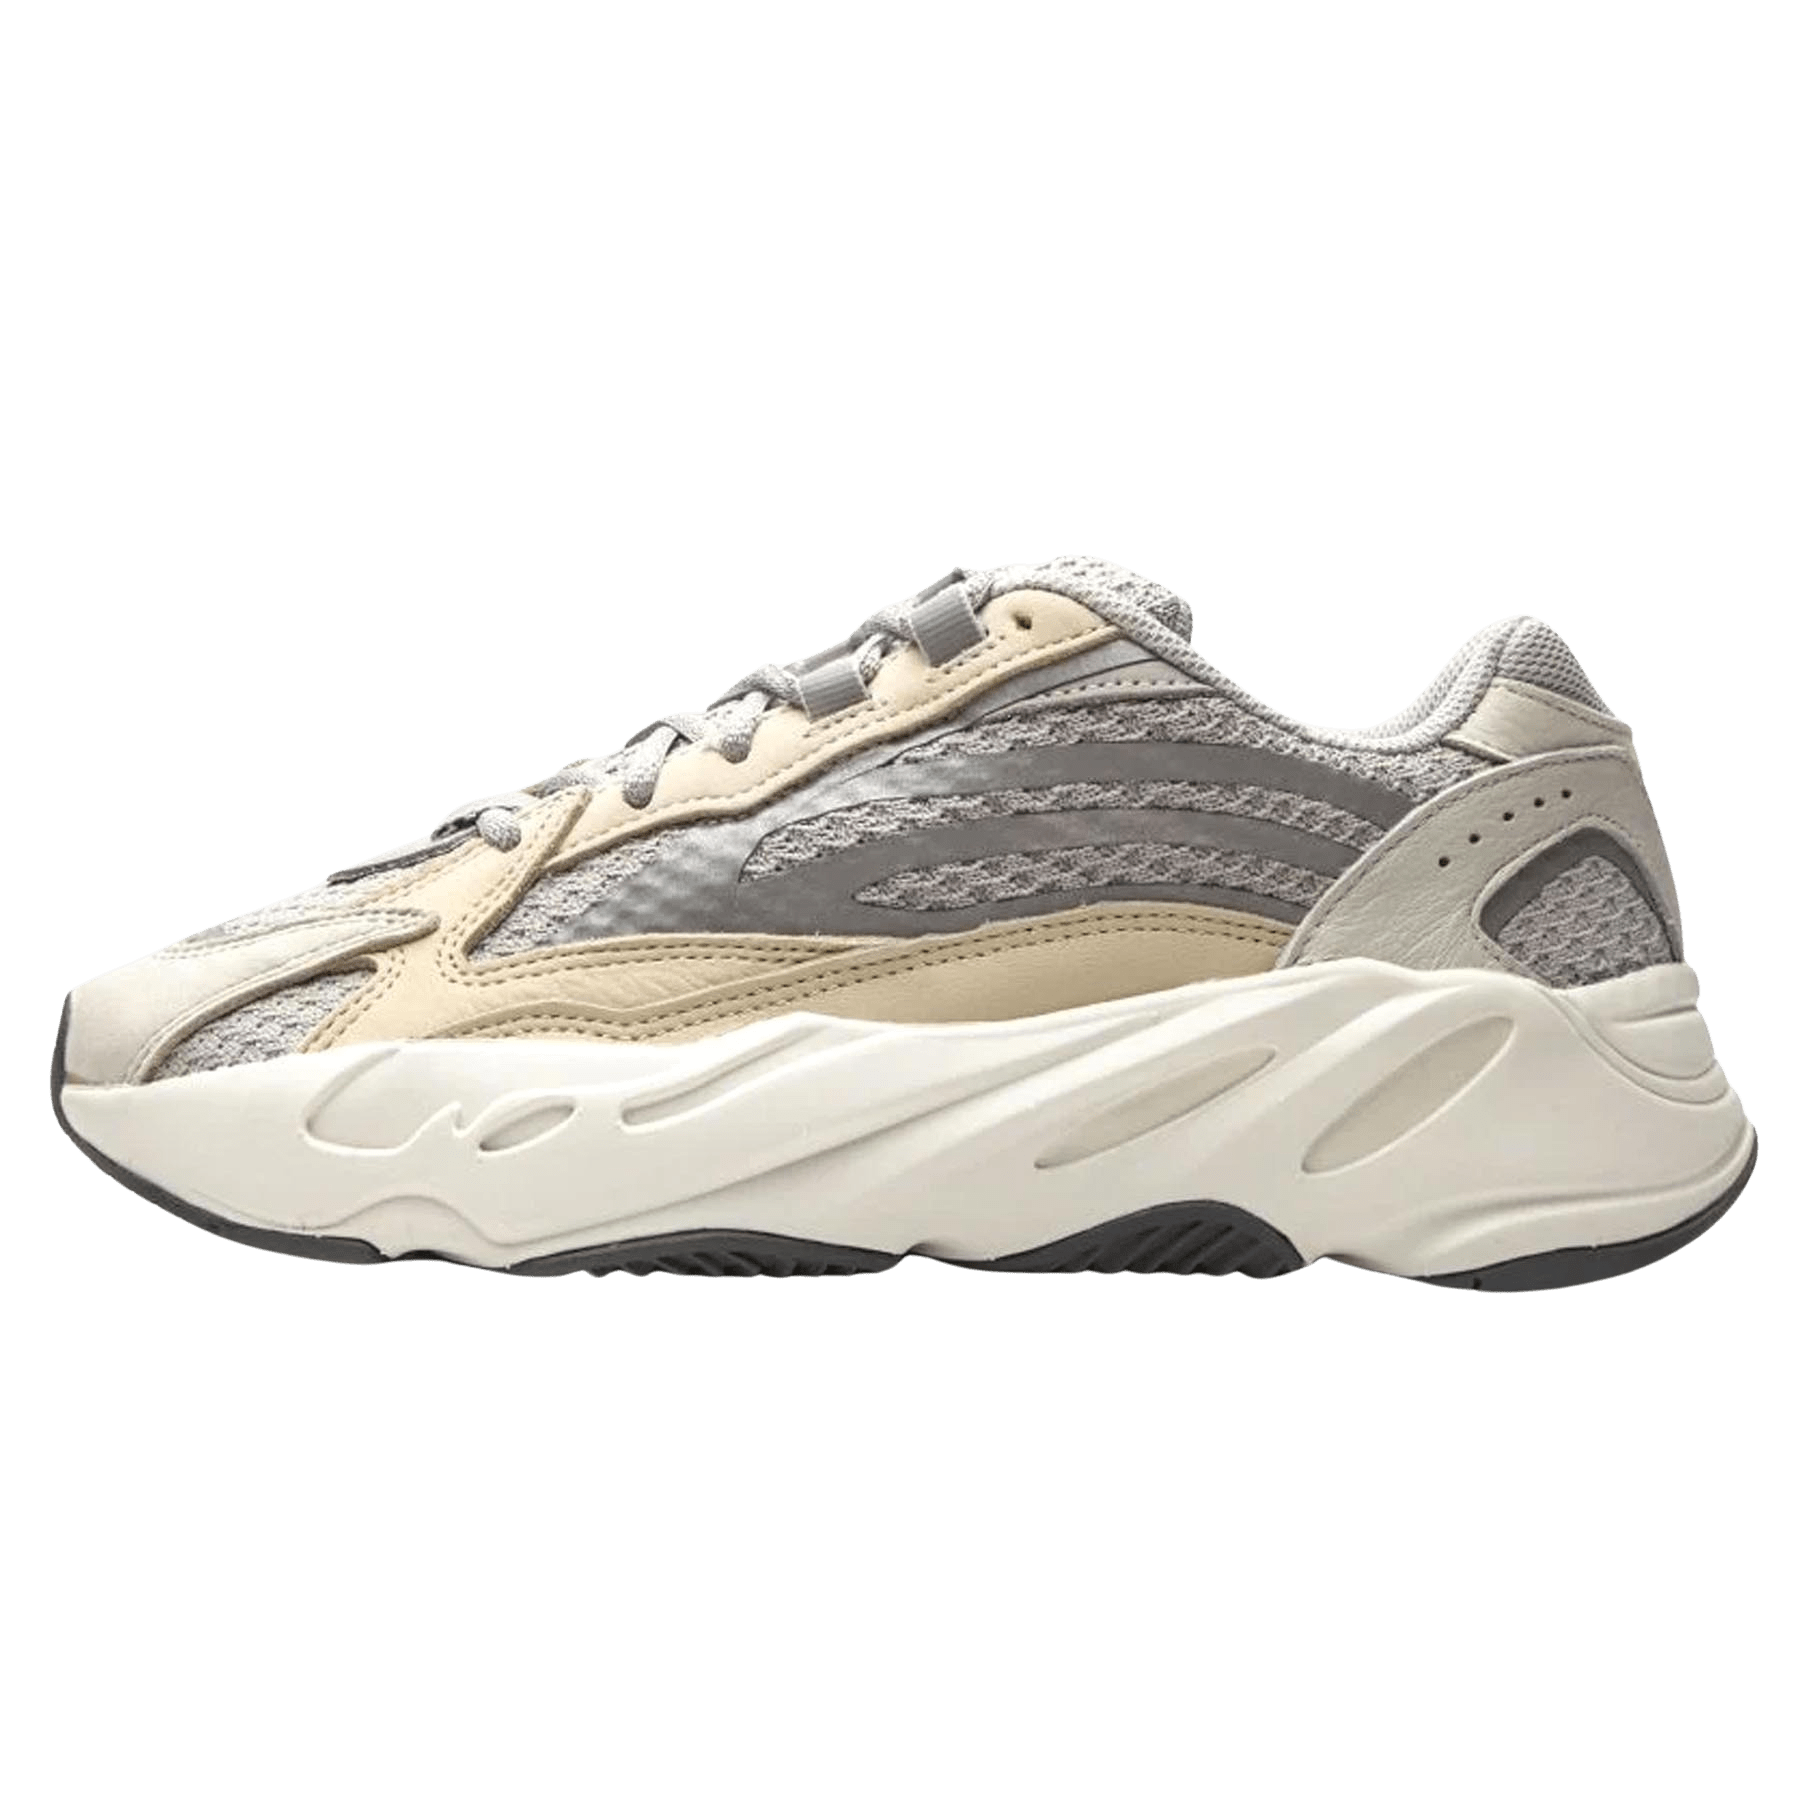 adidas Yeezy Boost 700 Cream Off White Sneakers Low Top Trainers Men Size  13US